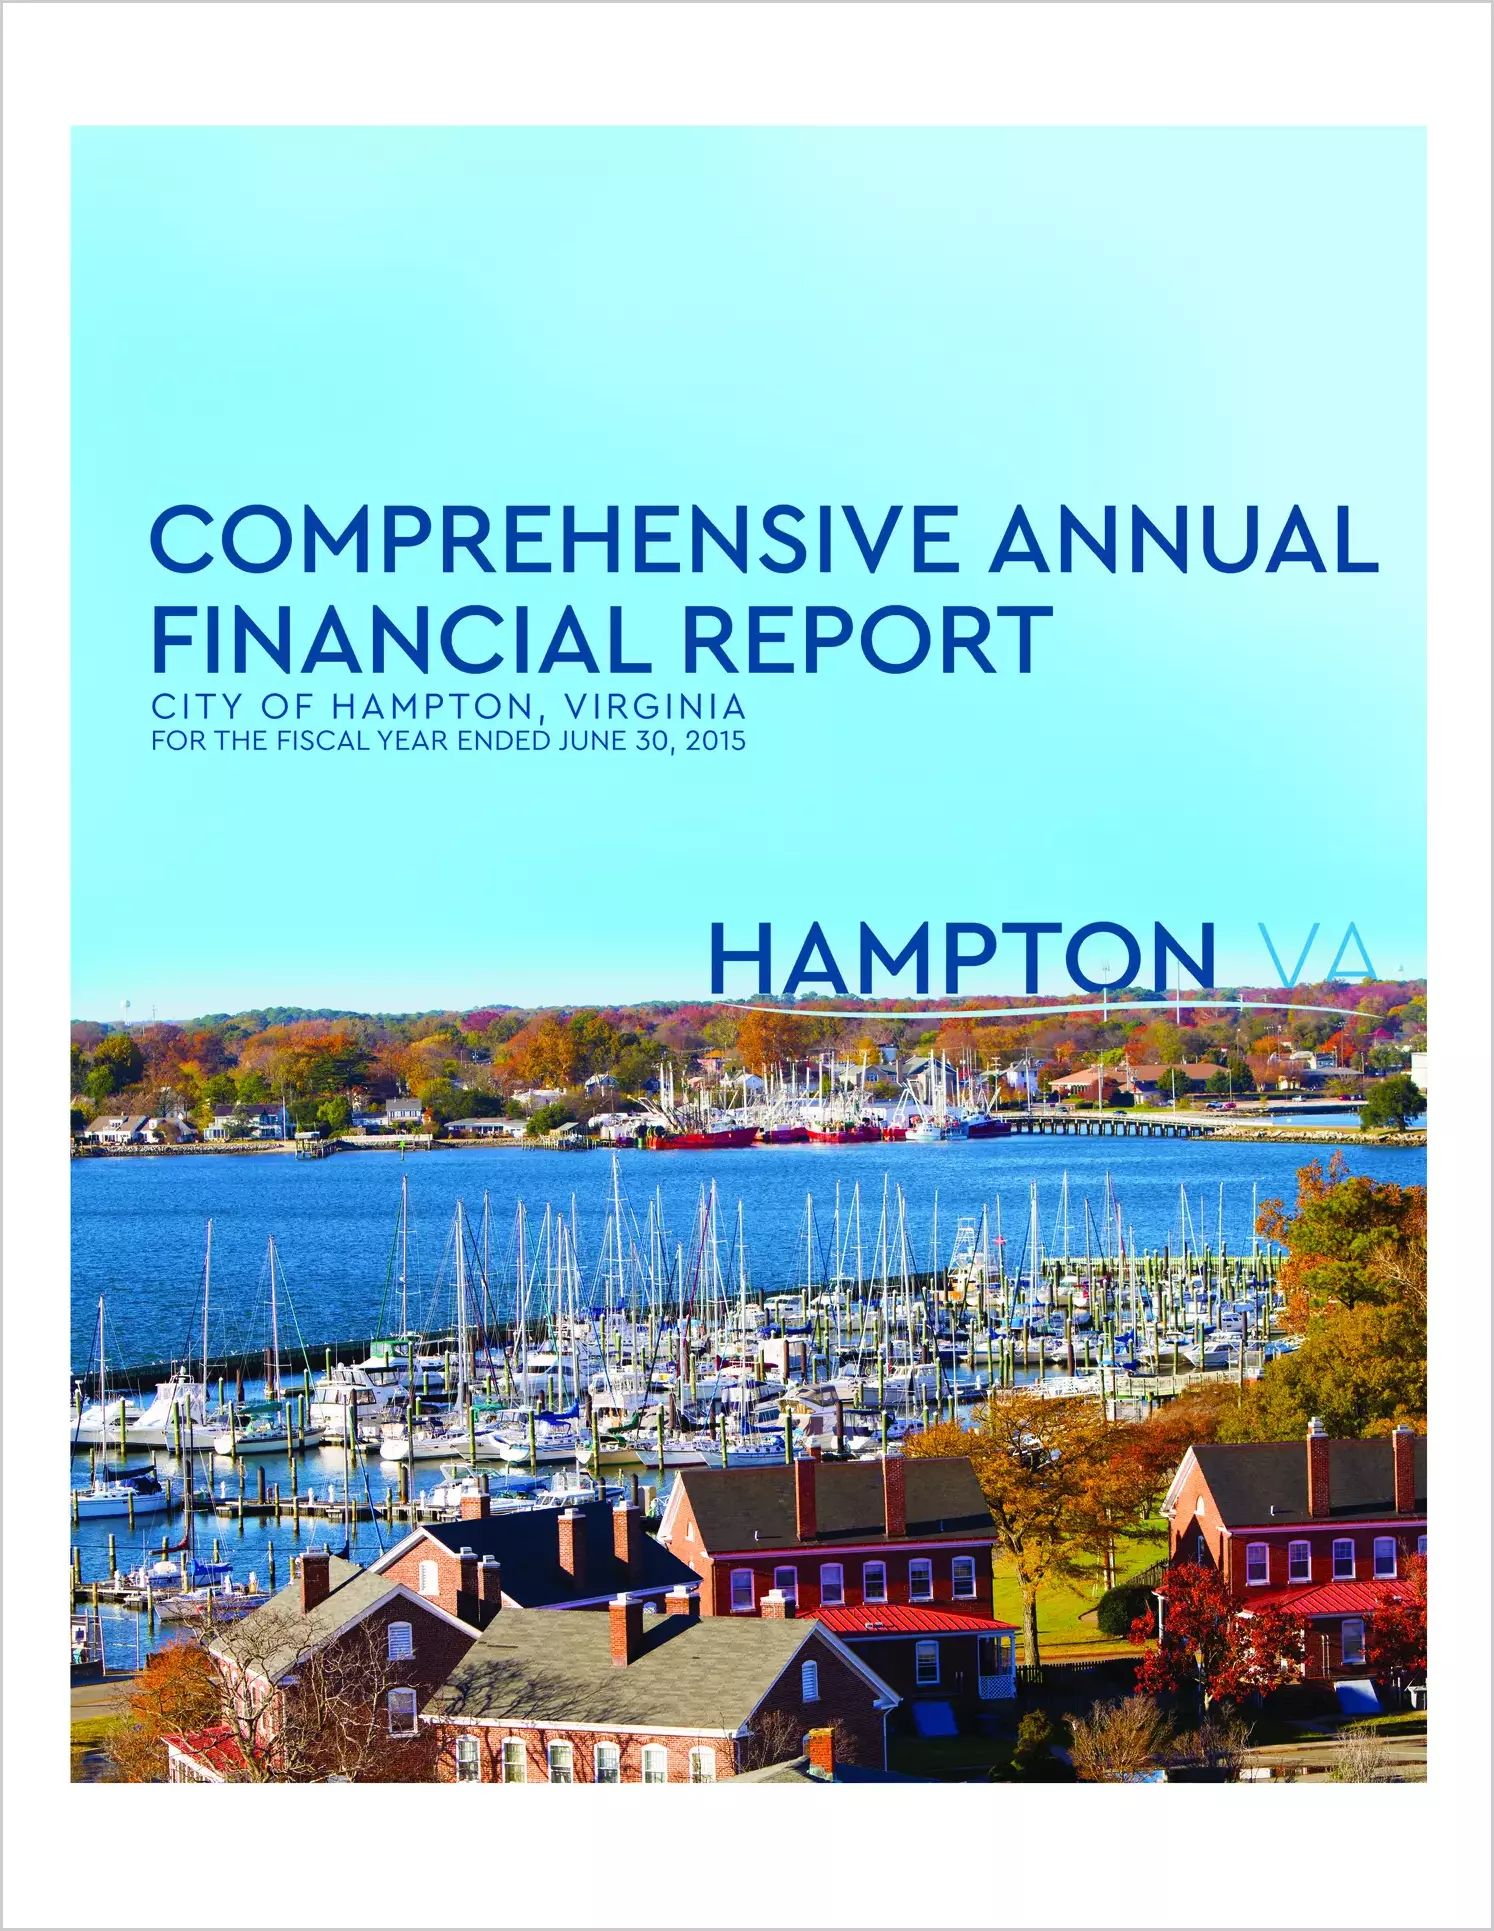 2015 Annual Financial Report for City of Hampton